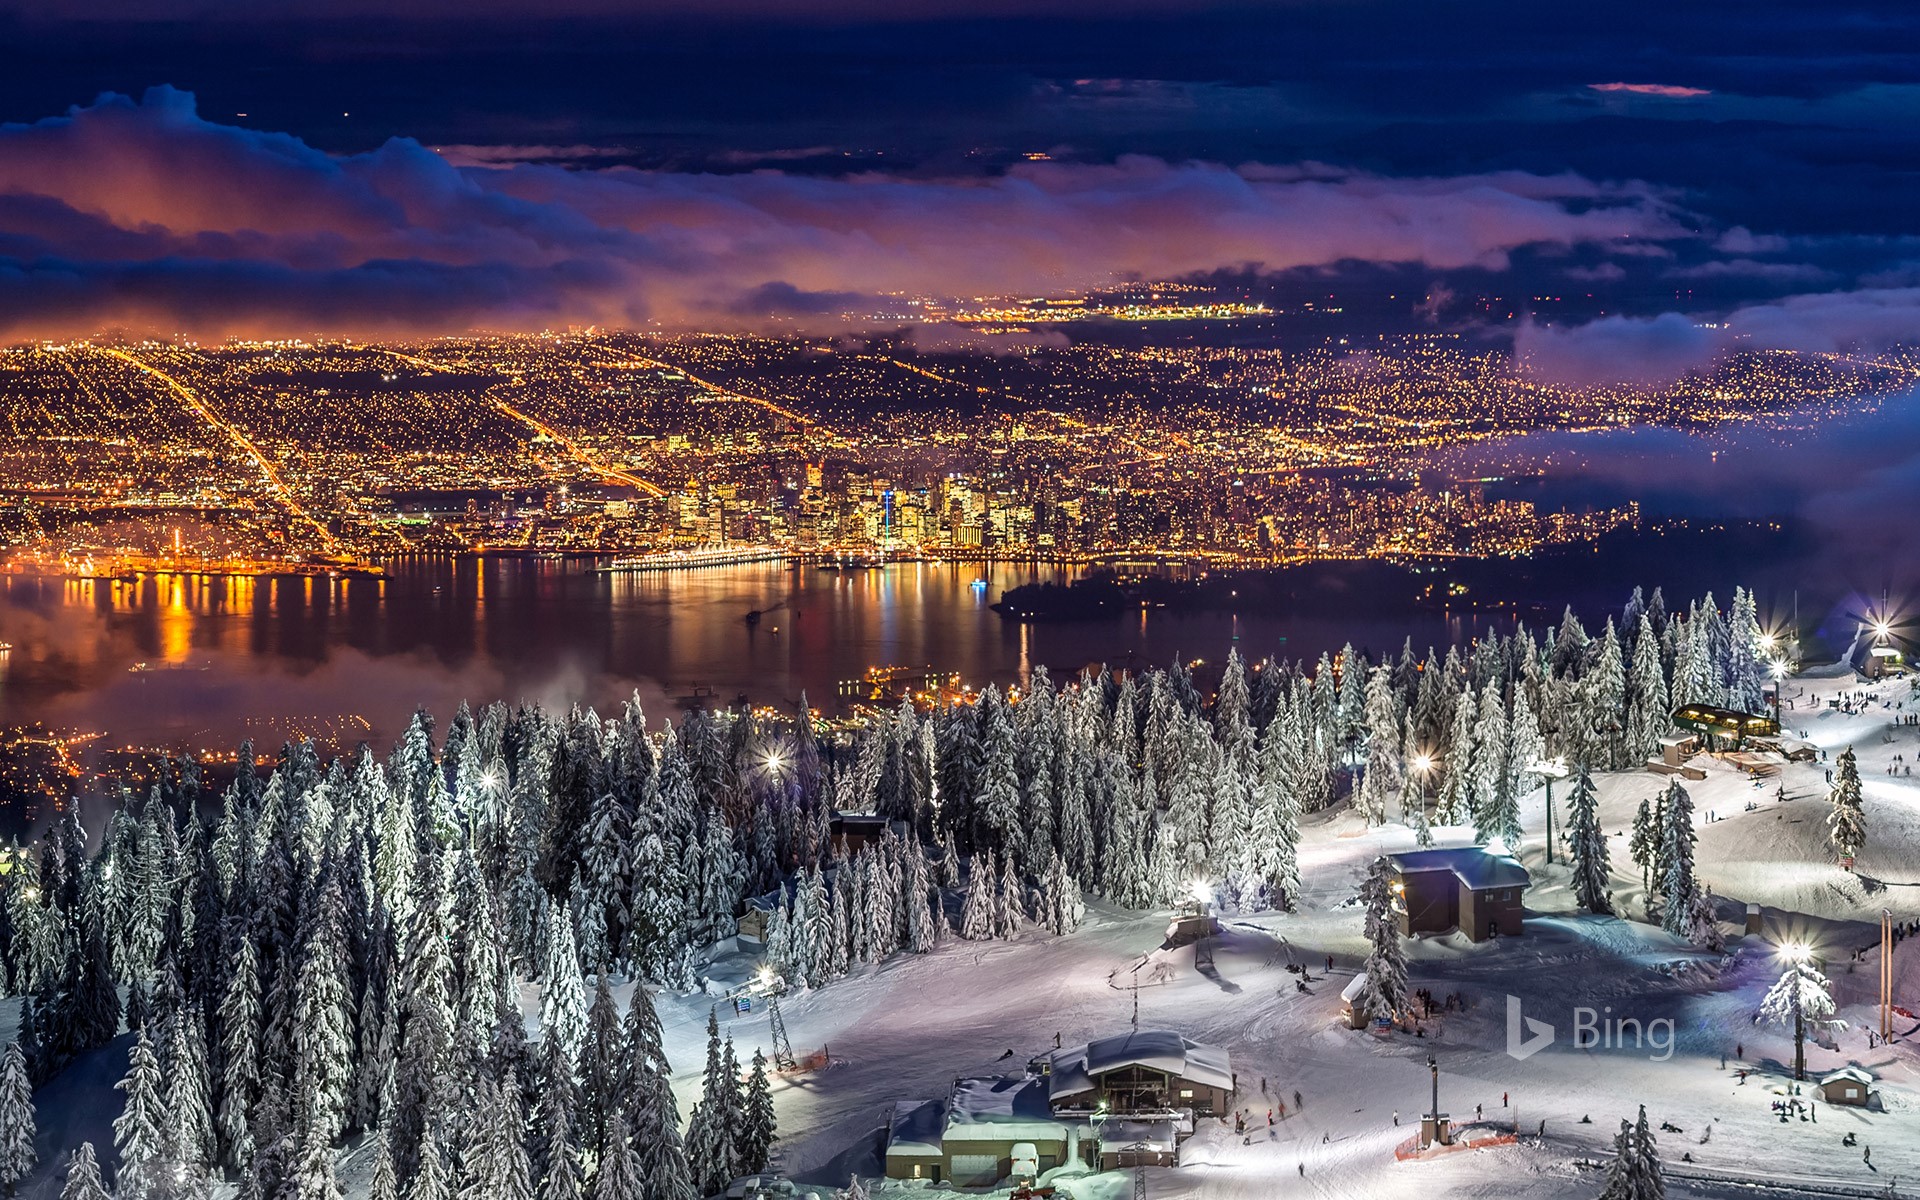 City lights from the snowy peak of Grouse Mountain at twilight, Vancouver, BC, Canada